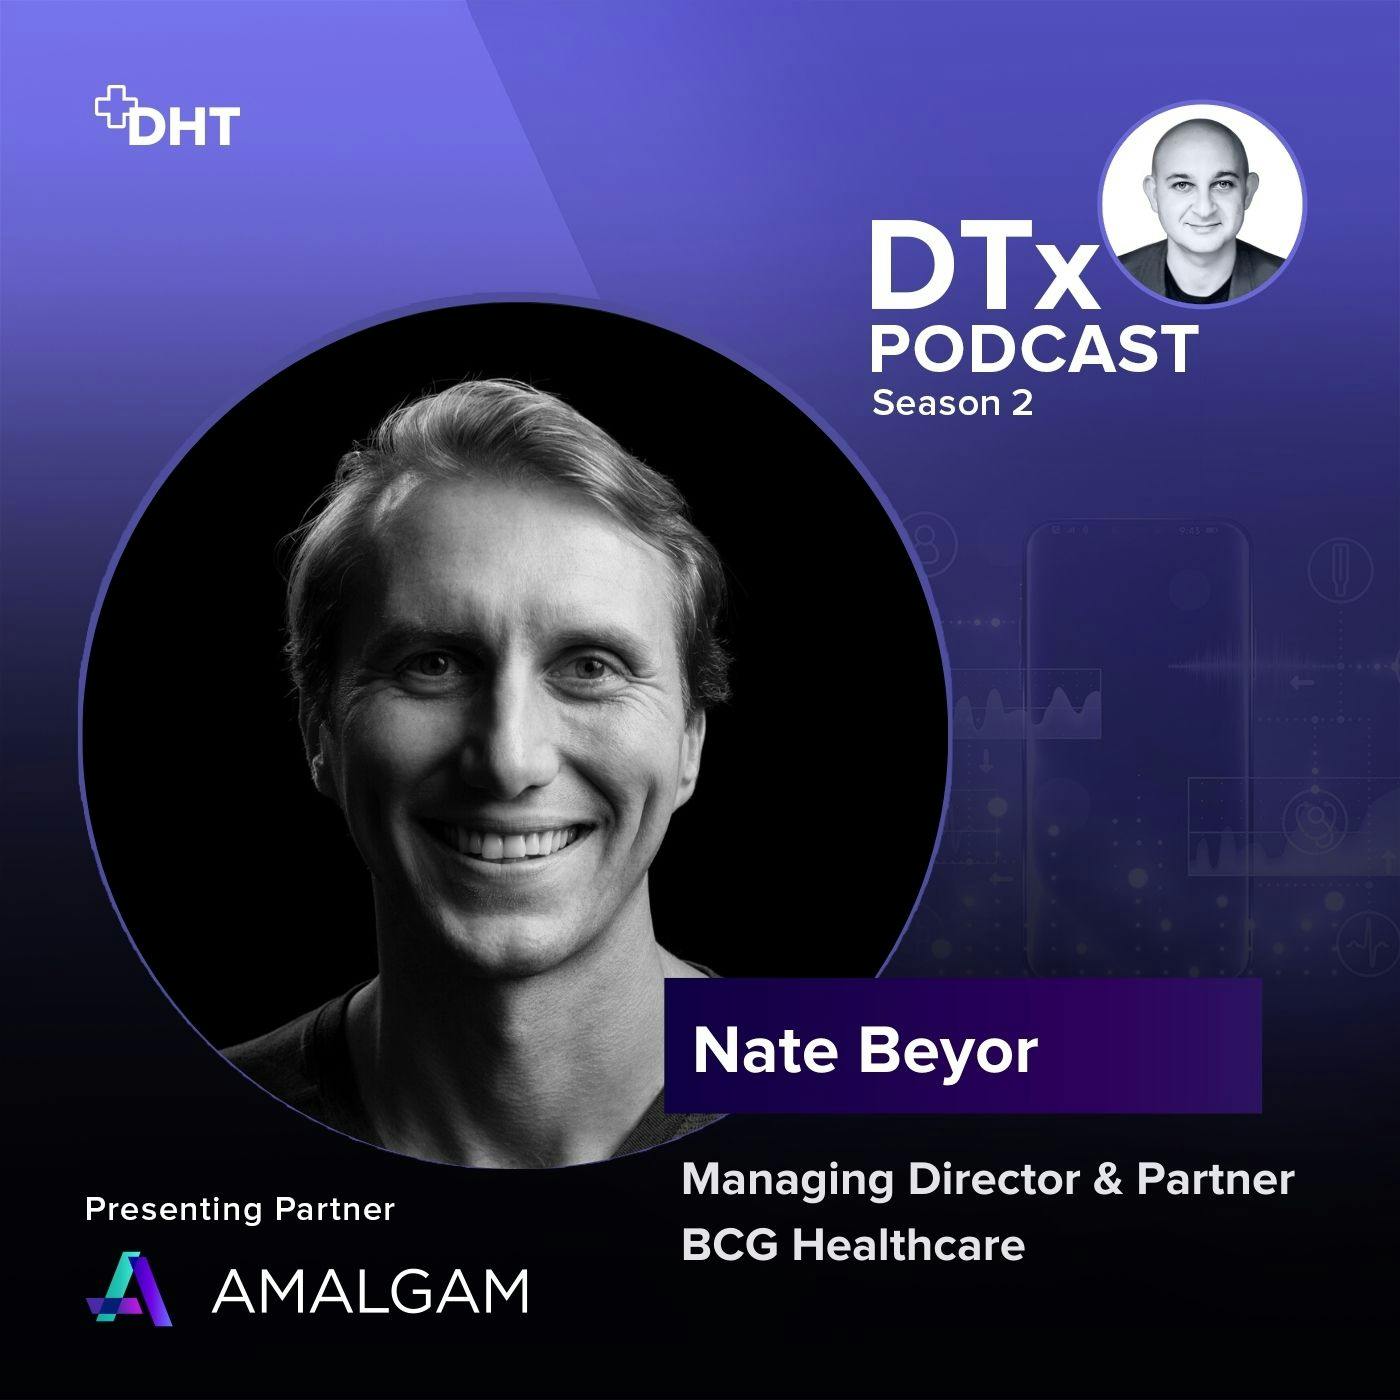 Ep40: Taking DTx to Market: Nate Beyor Gives Insights On Building Teams and Products